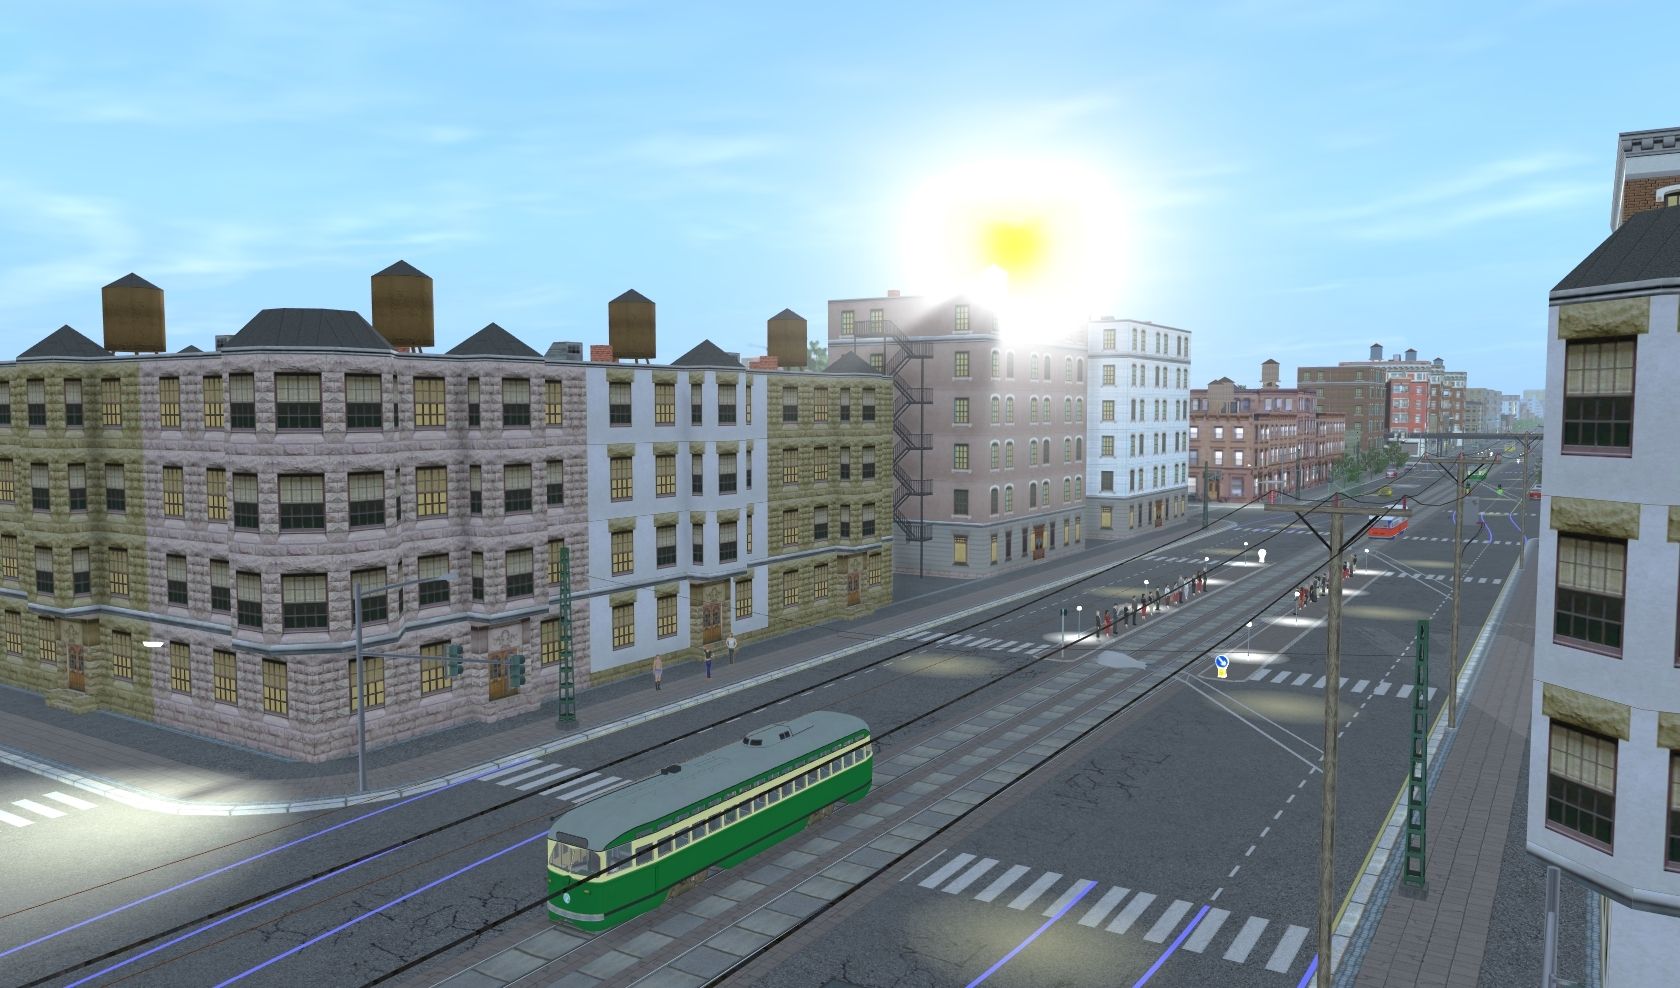 Just-another-screen-from-my-Municipal-Transit-Railway-been-taken-over-into-T%3AANE-and-including-new-seasonal-buildings..jpg